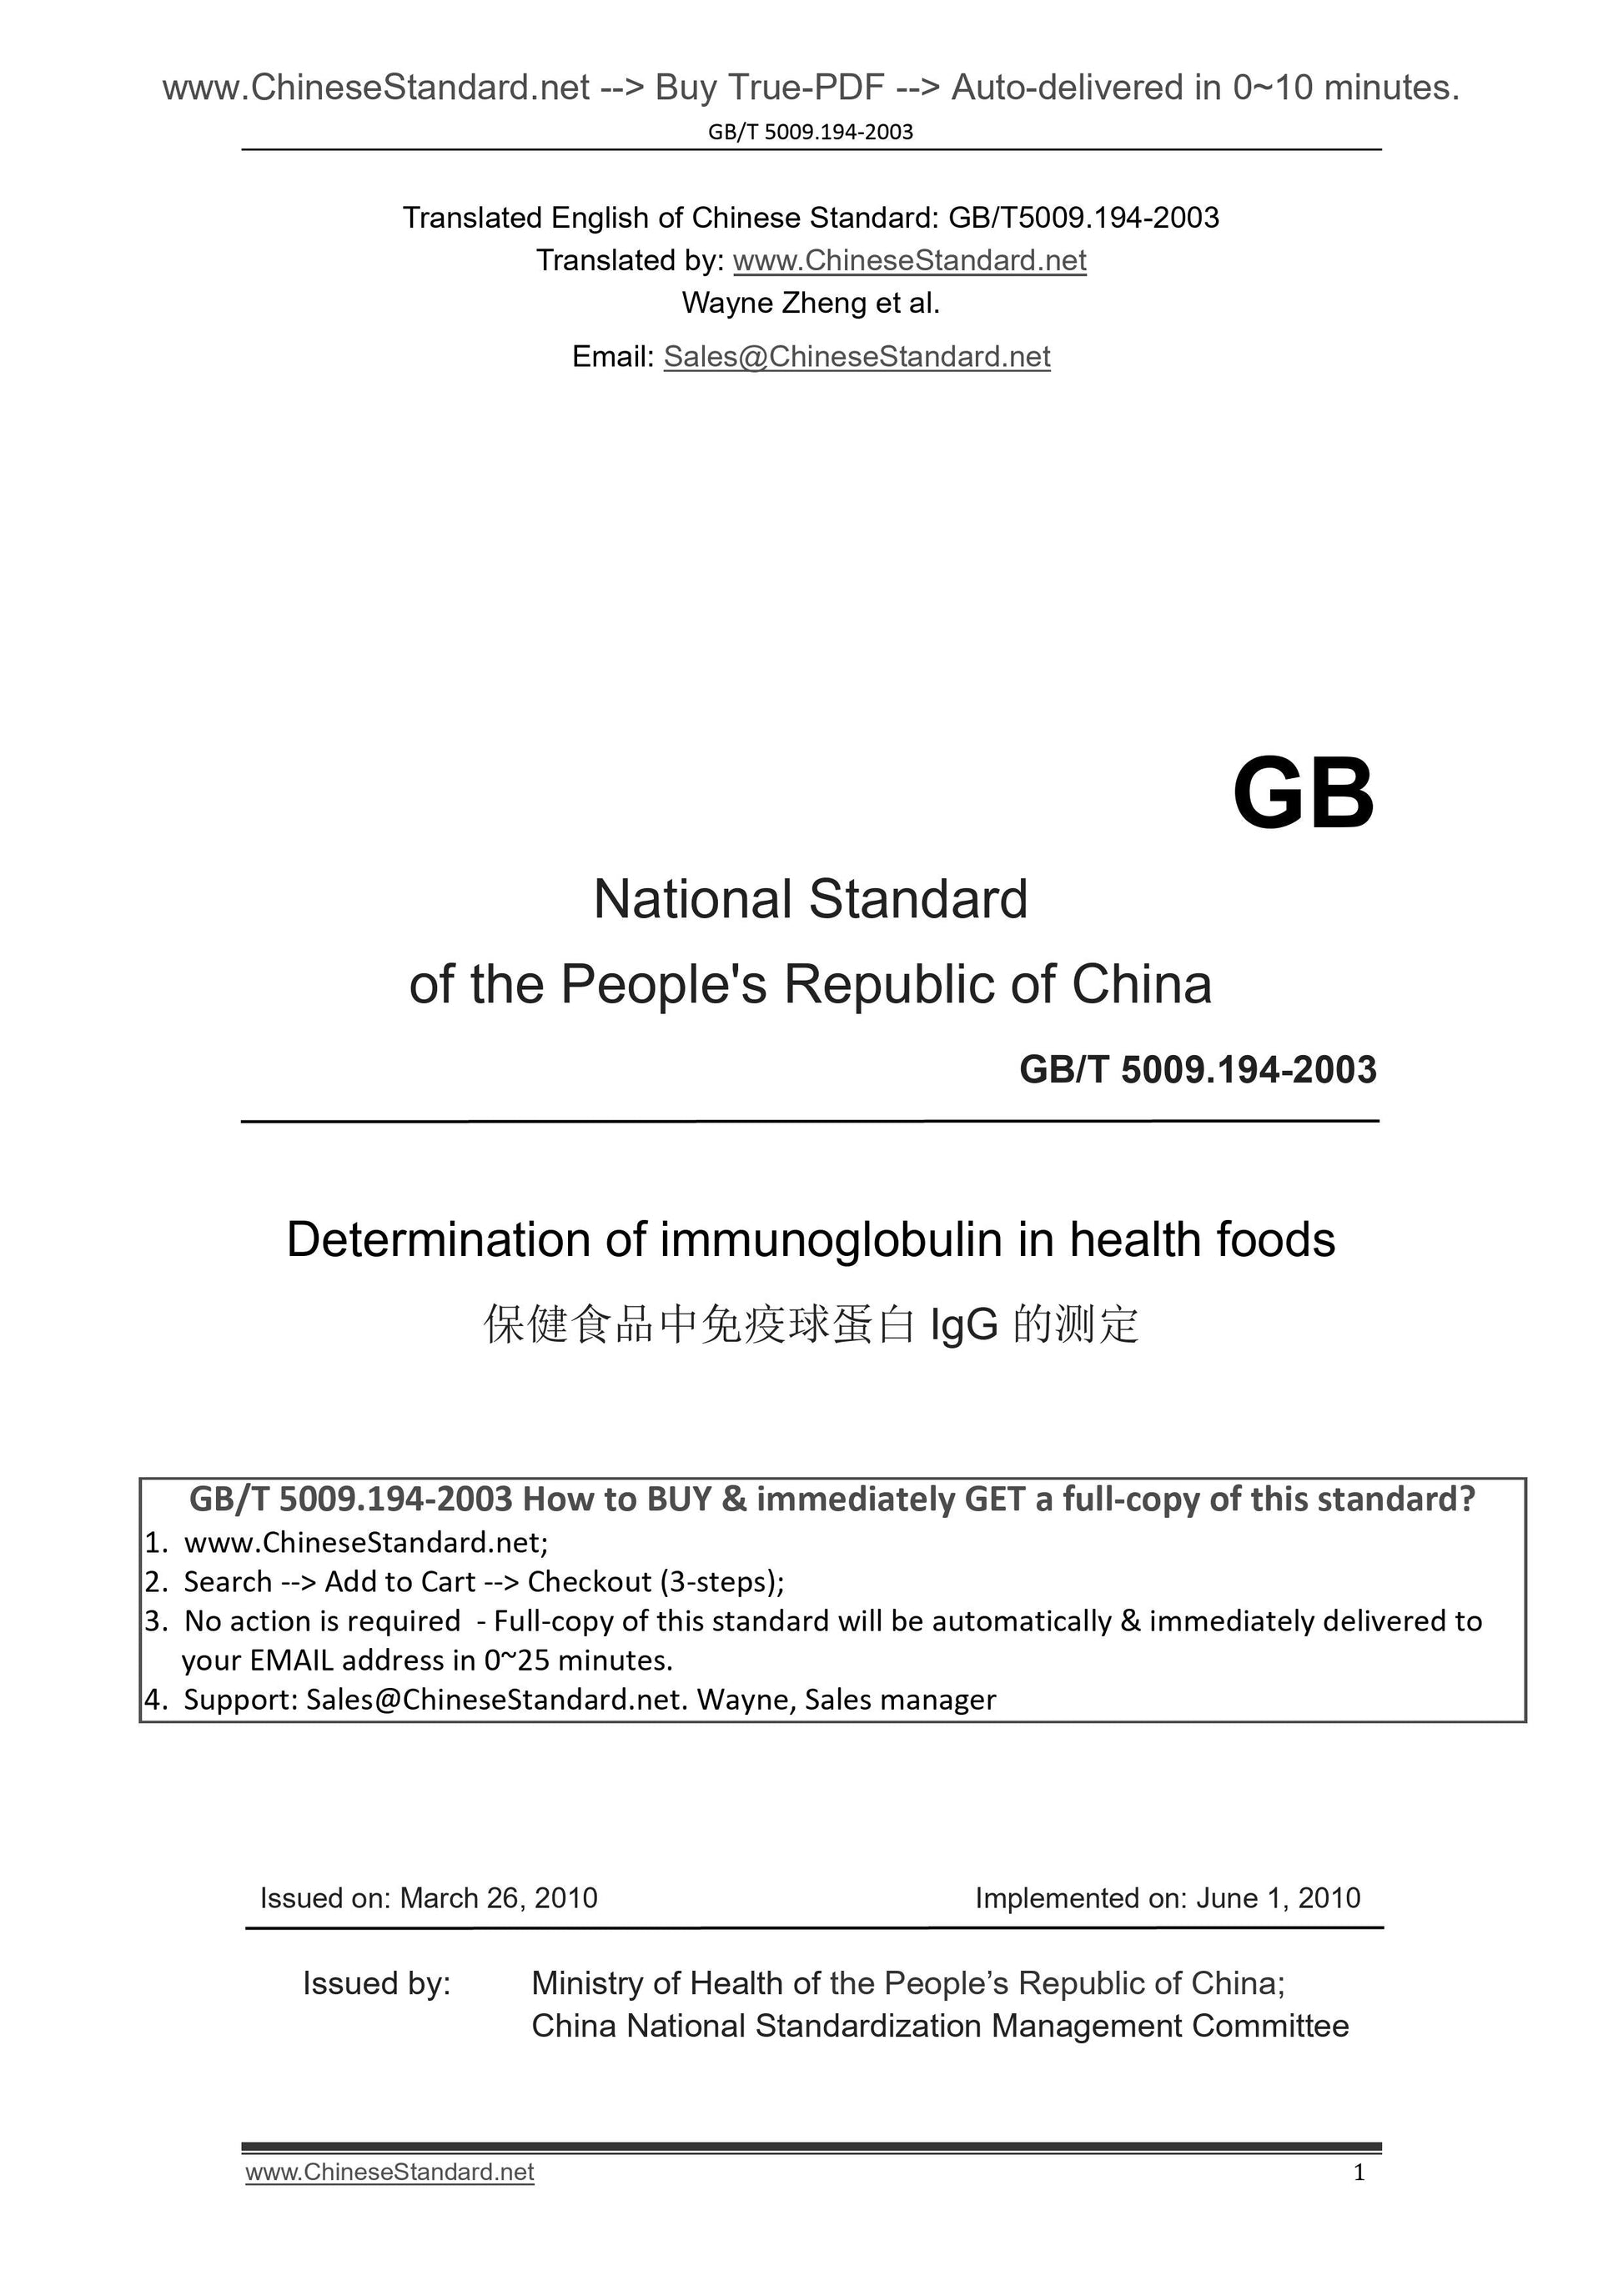 GB/T 5009.194-2003 Page 1